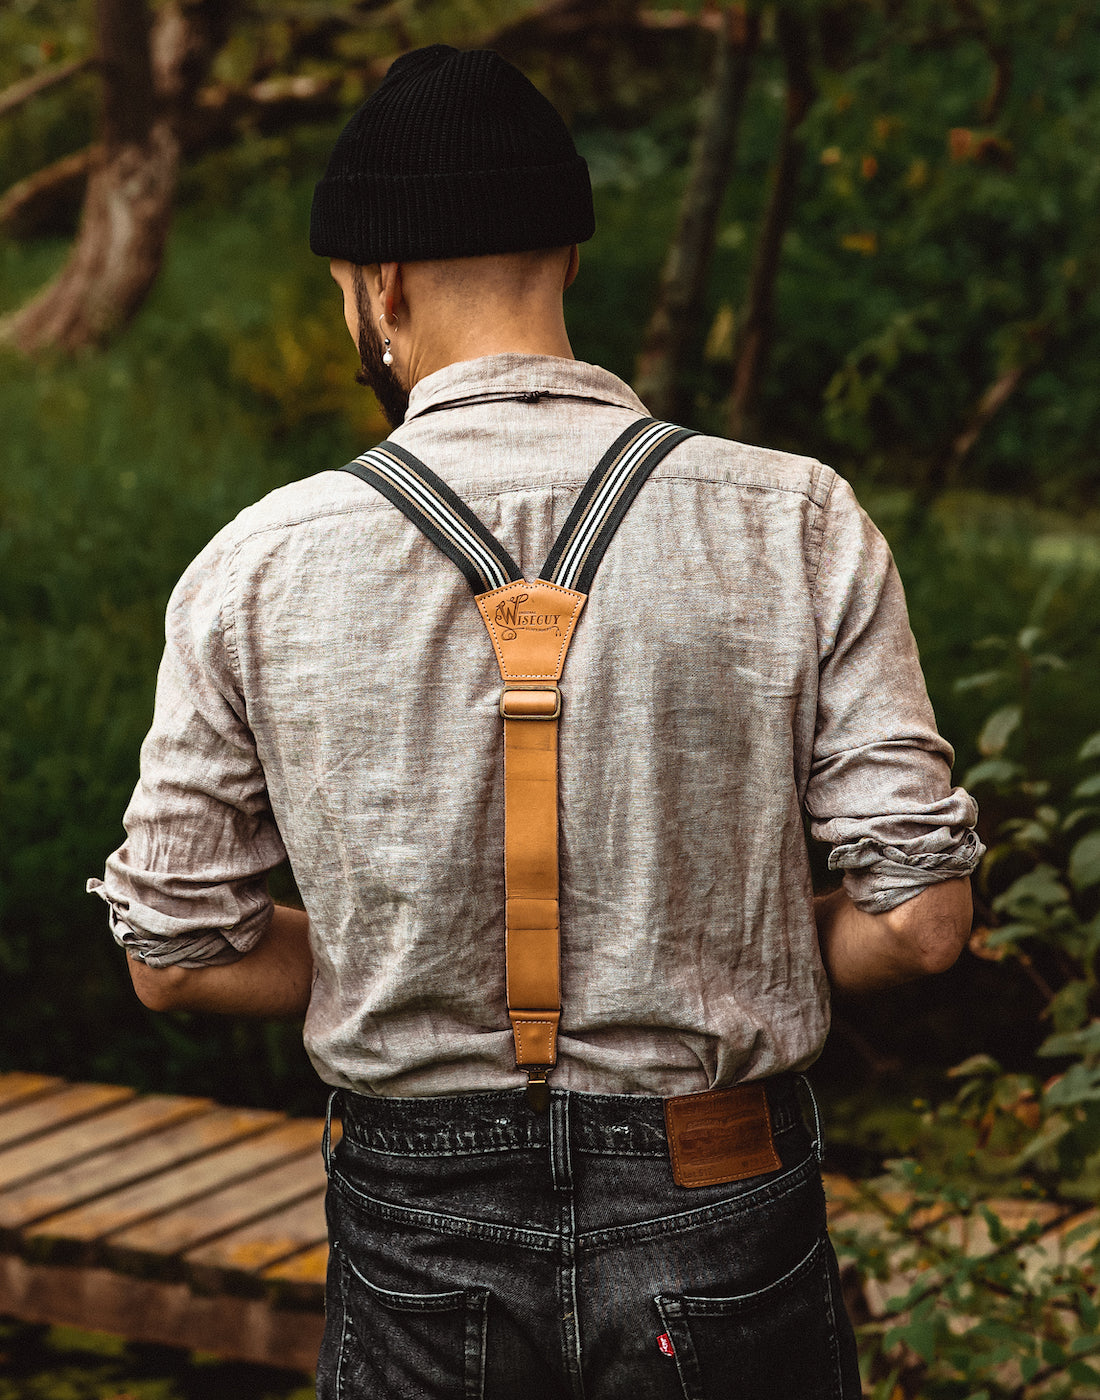 How to Style Suspenders For Men